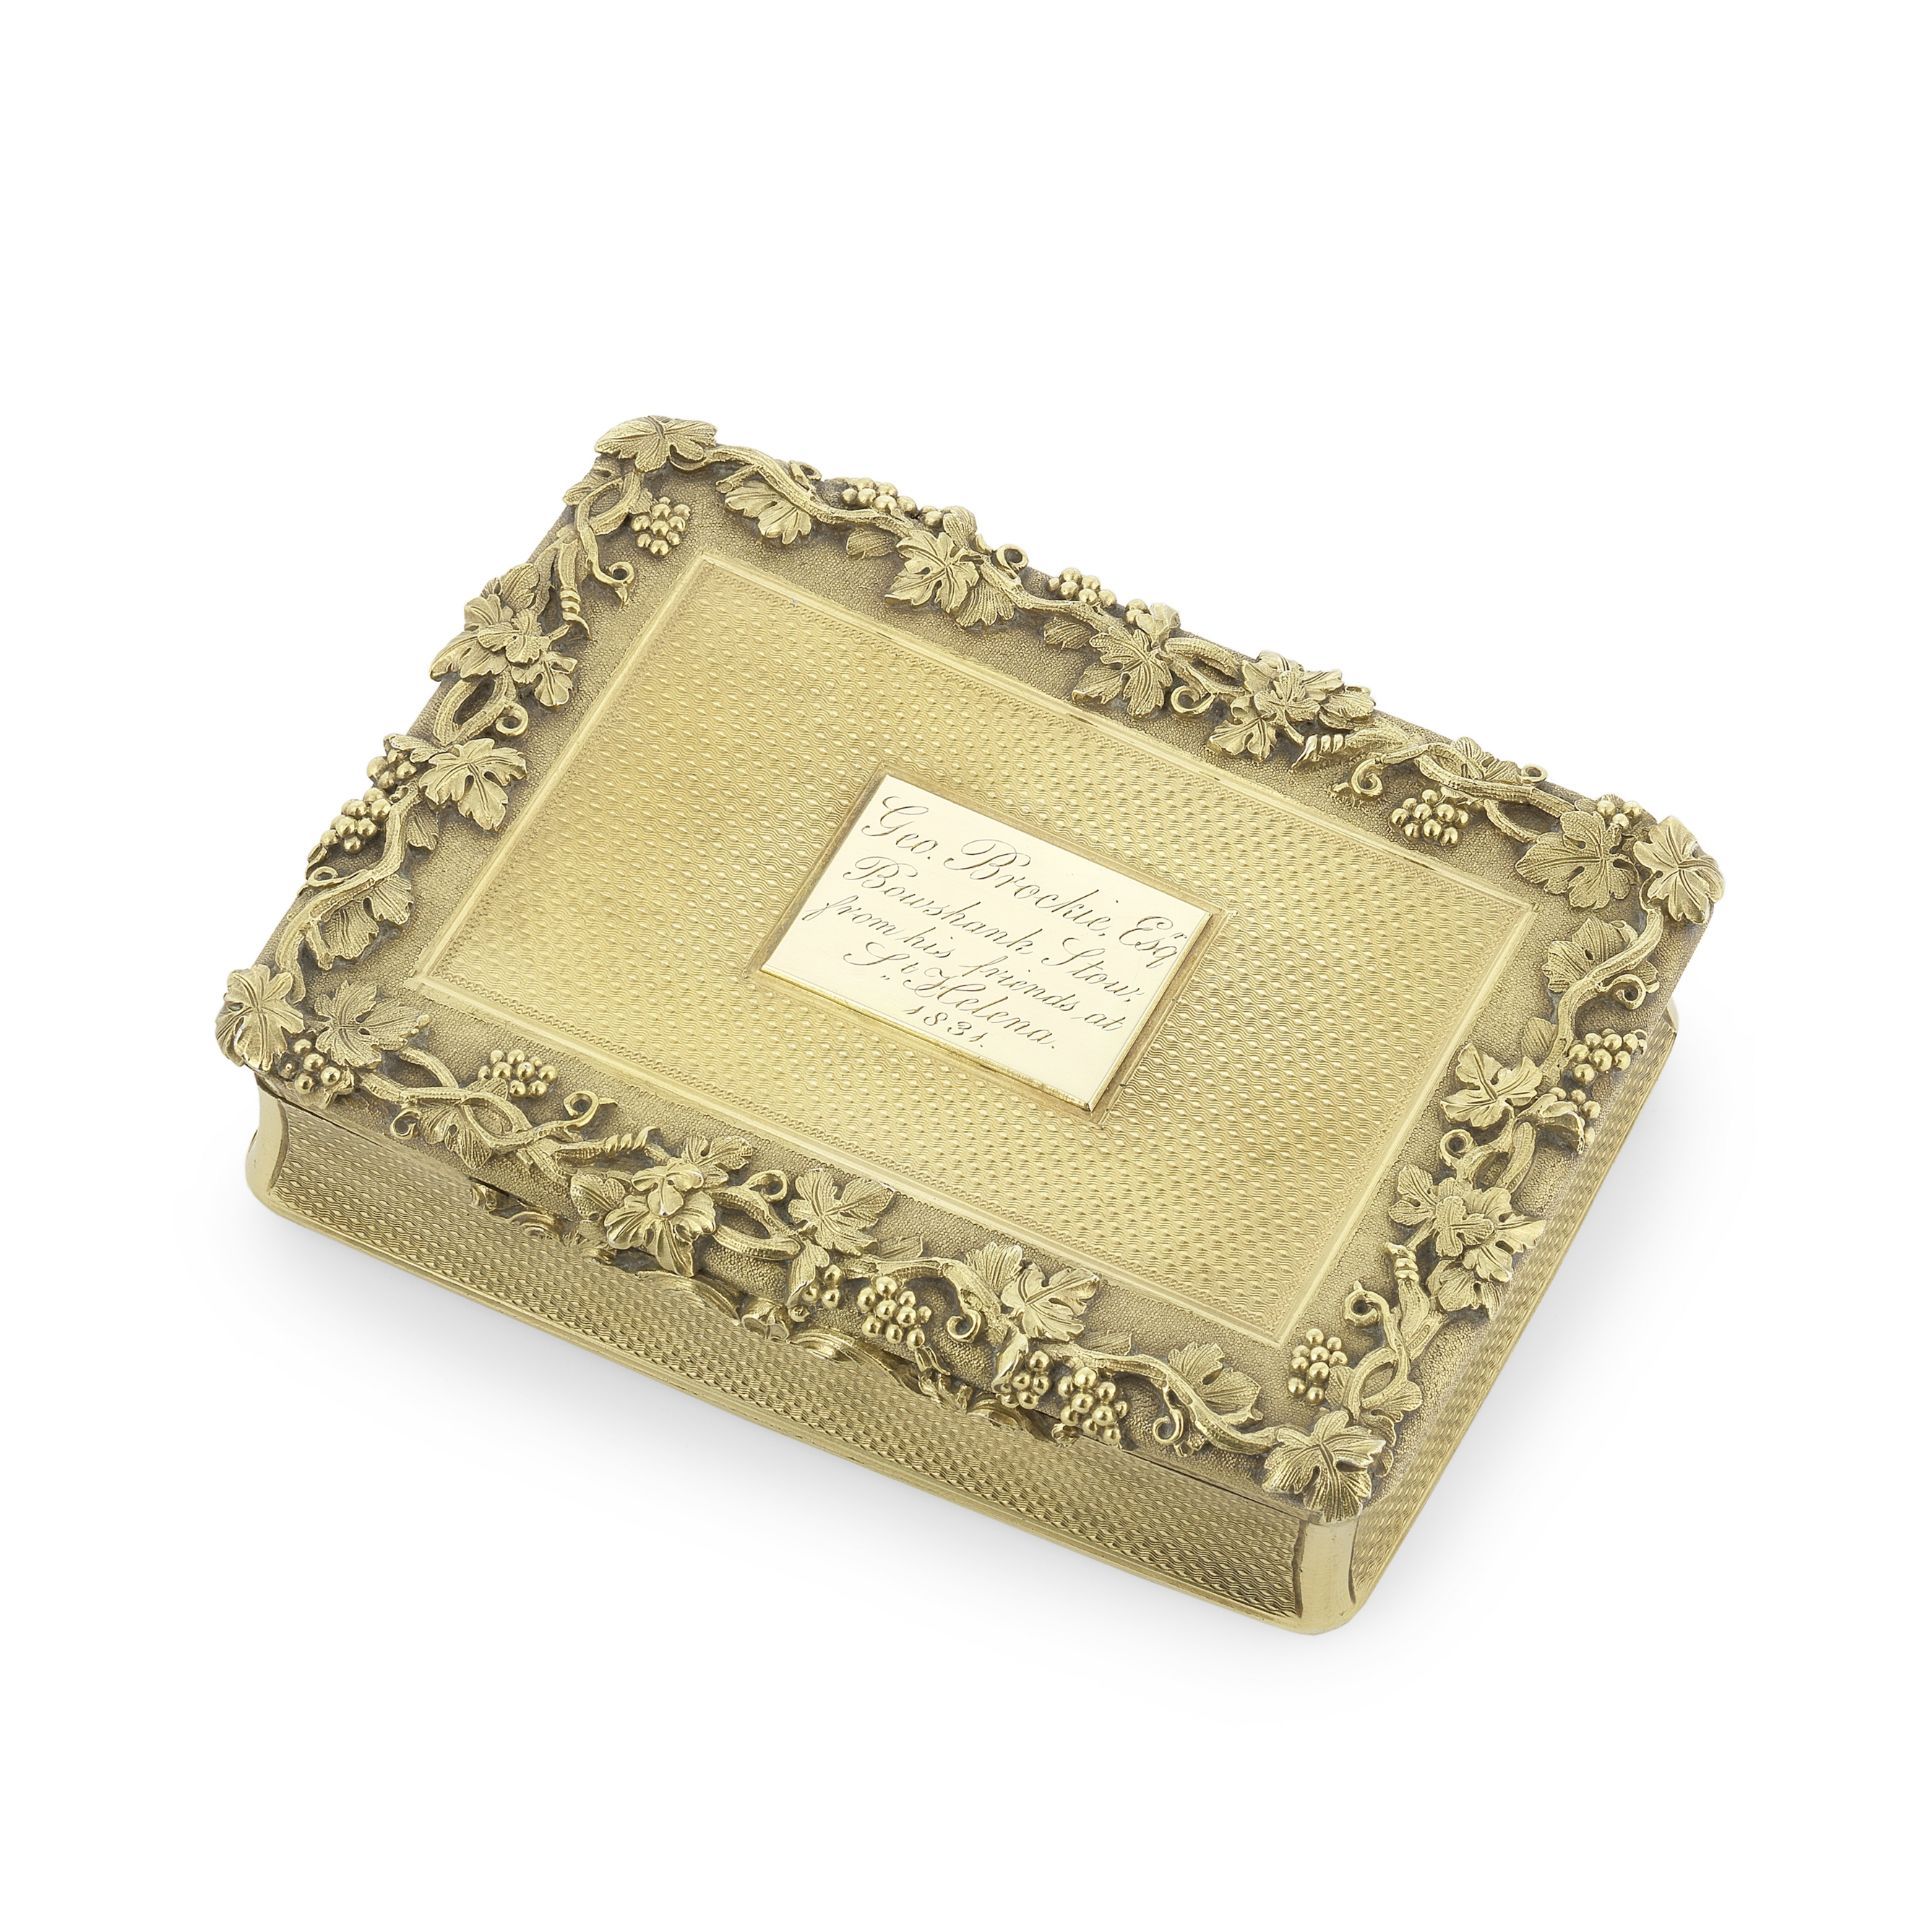 A William IV silver-gilt snuff box Charles Reilly and George Storer, London 1831